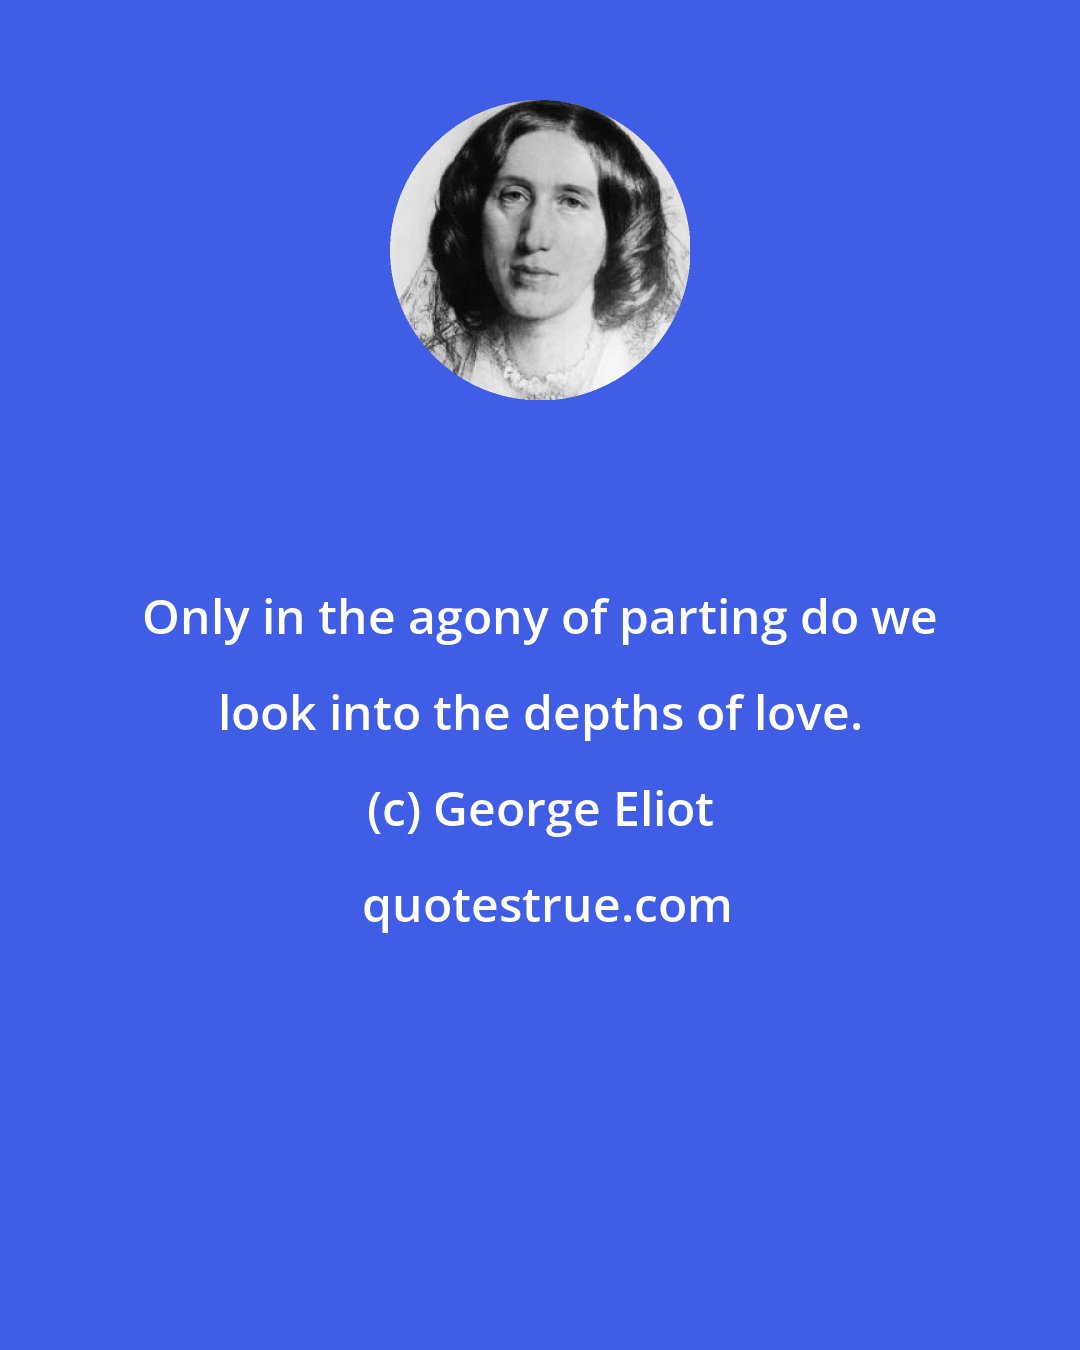 George Eliot: Only in the agony of parting do we look into the depths of love.